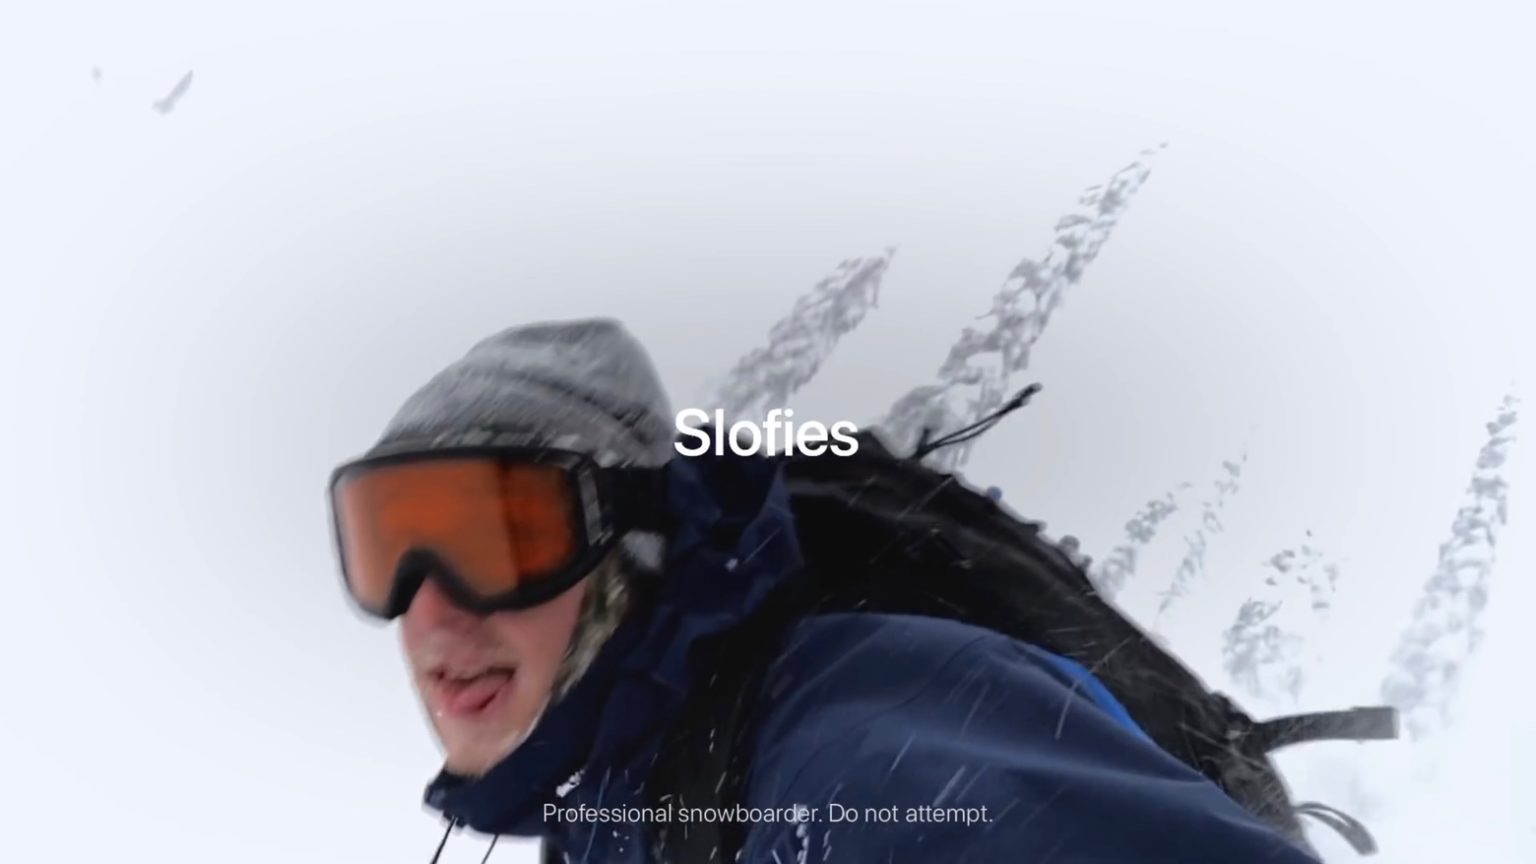 A snowboarder takes a slofie